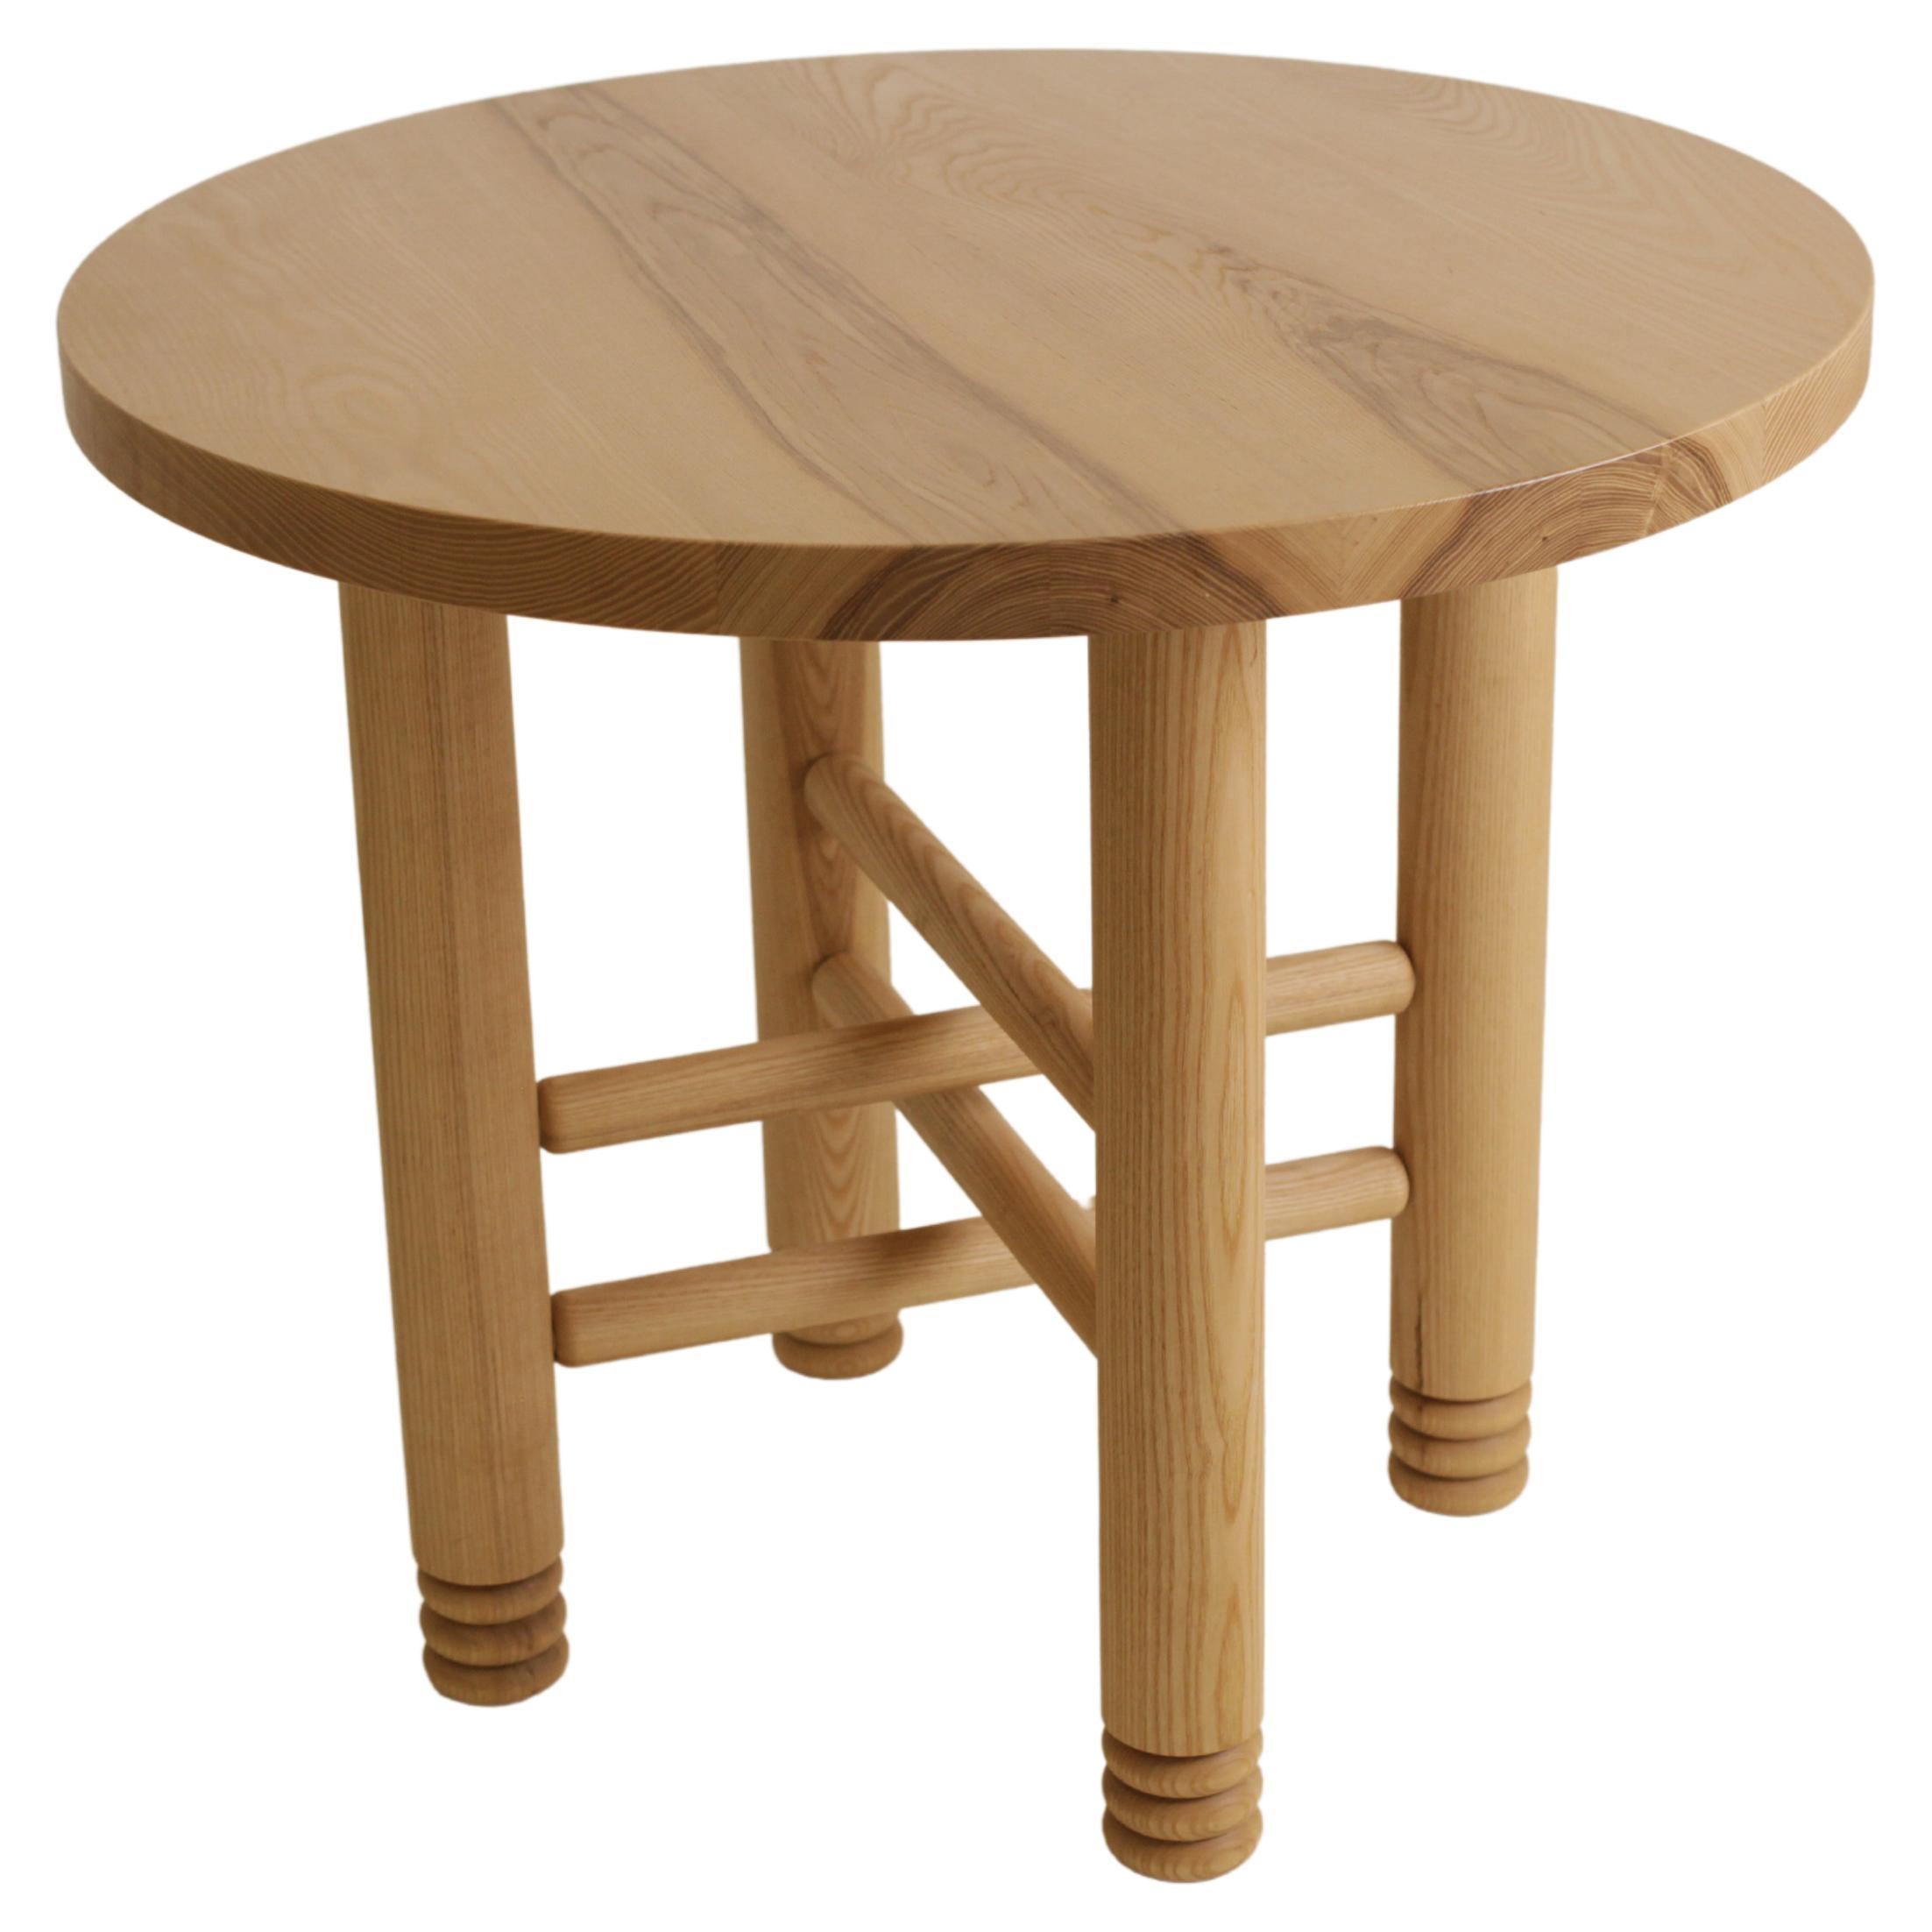 American  Cafe Table in Turned Ash with Beaded Leg Details by Boyd & Allister For Sale